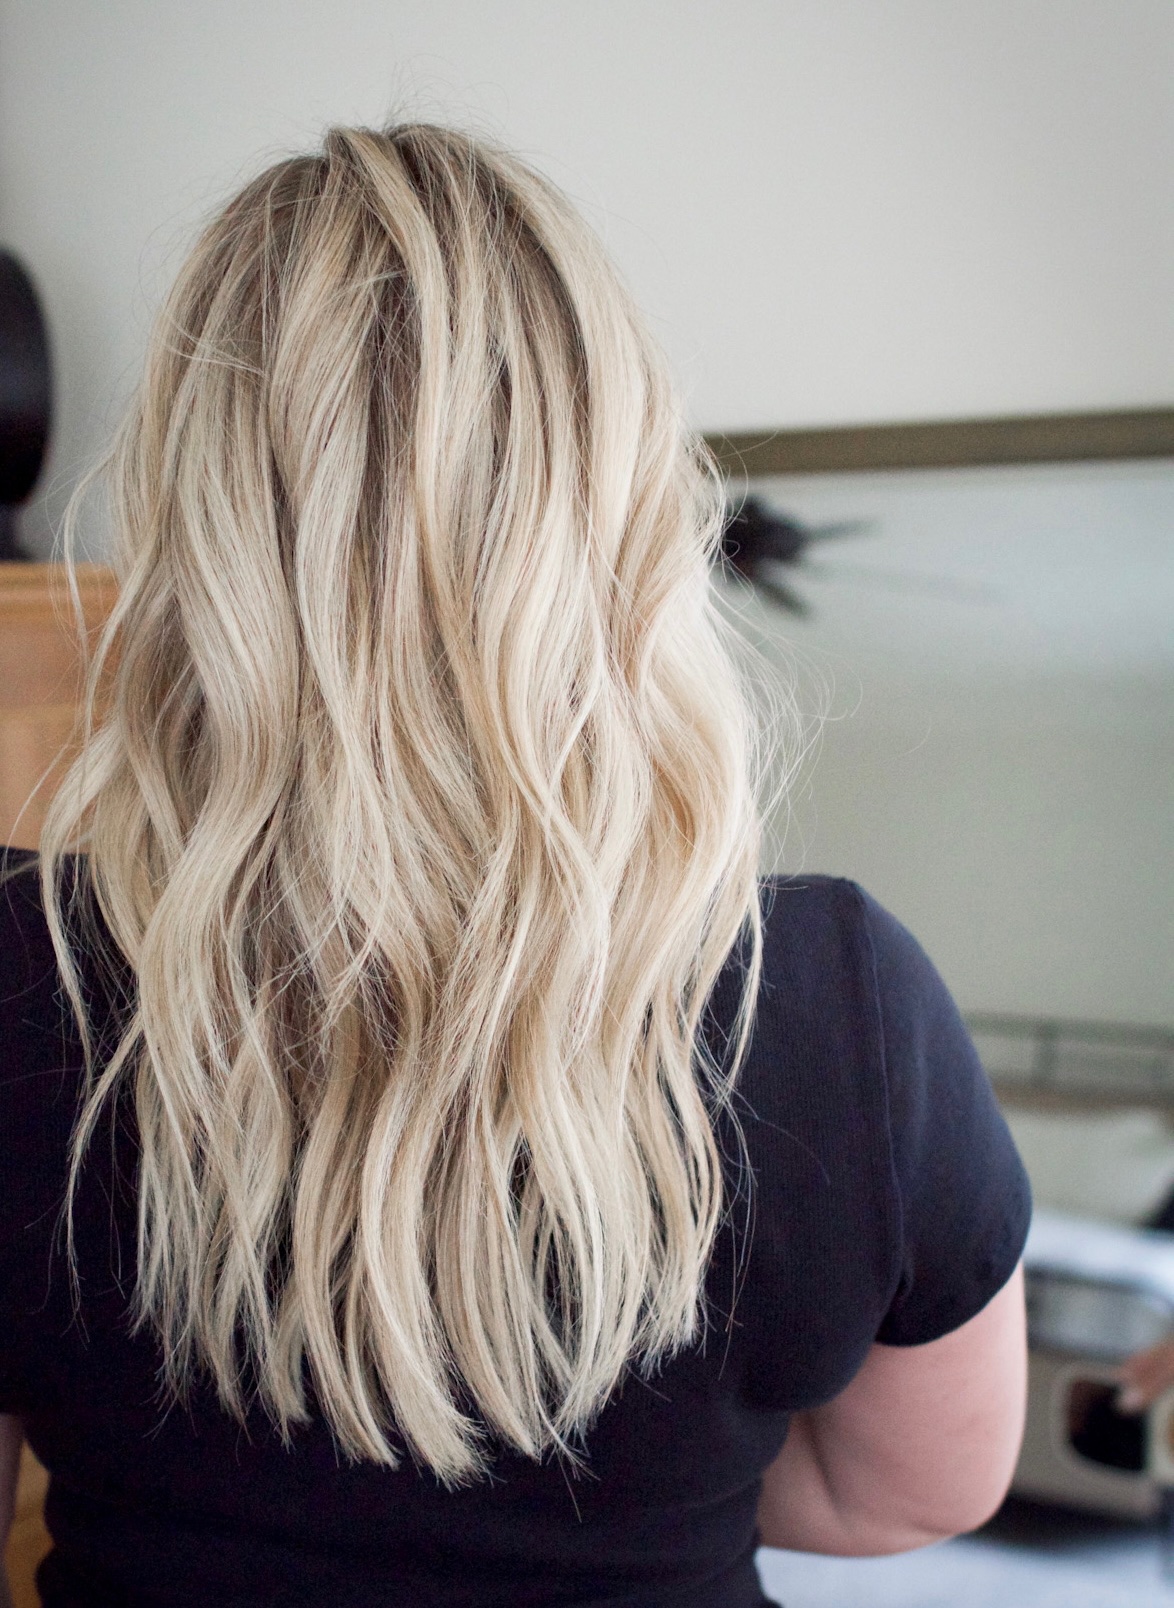 All About Toning Hair – The Small Things Blog